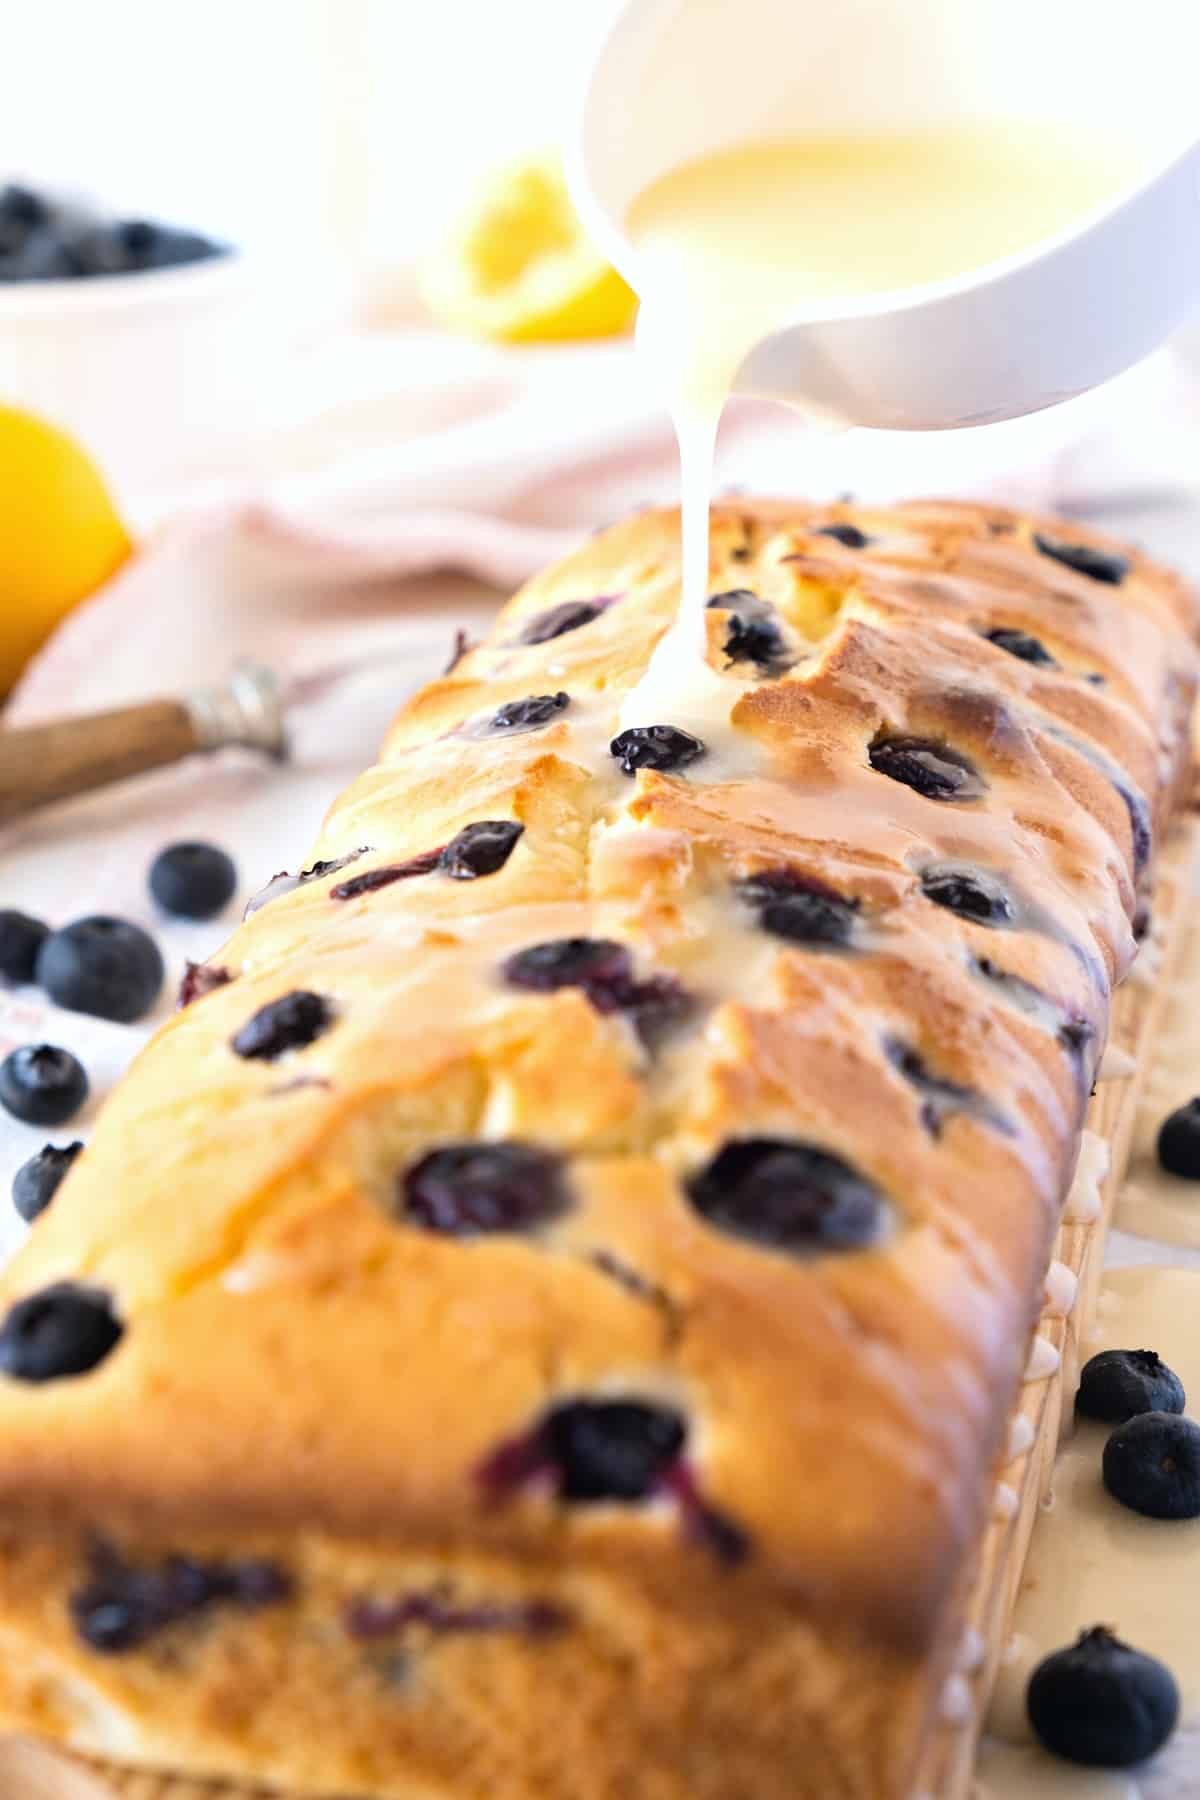 Pouring lemon glaze over a loaf of gluten-free blueberry bread.